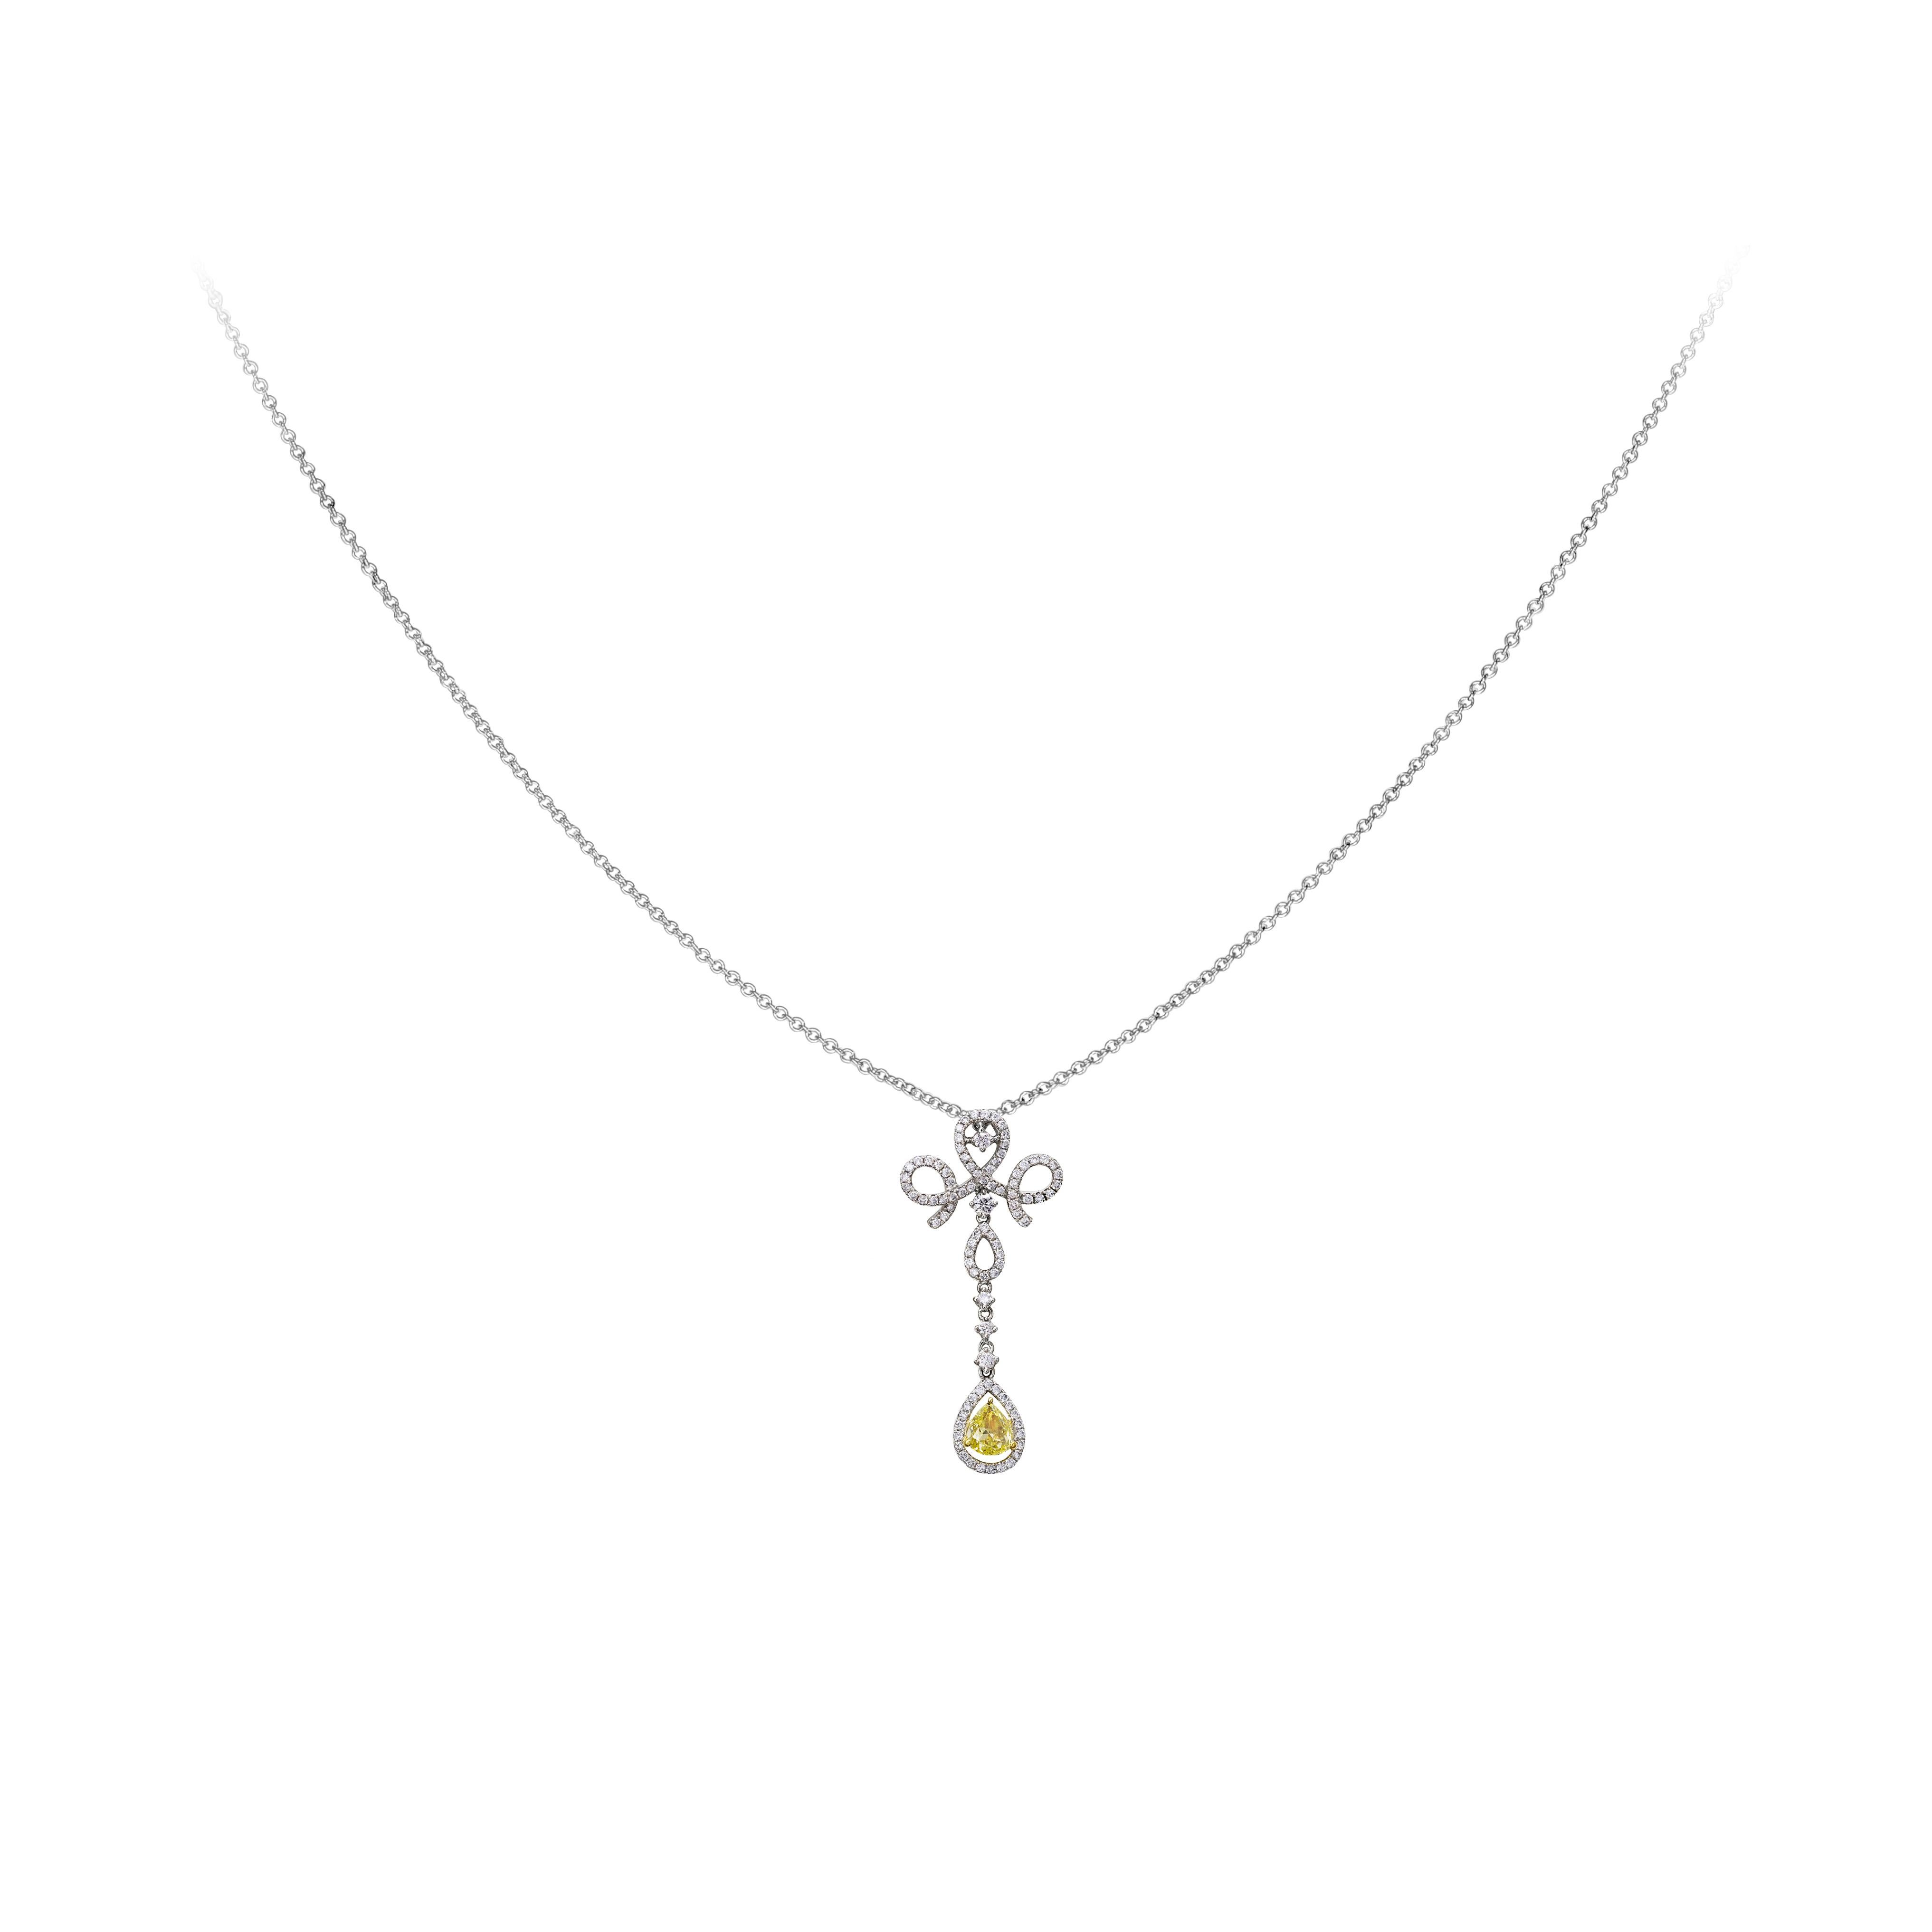 Features a fancy yellow pear shape diamond center weighing 0.43 carats  set in an open-work mounting embellished by round brilliant diamonds weighing 0.63 carats. Made in 18k white gold. Attached to a 16 inch adjustable white gold chain.

Style